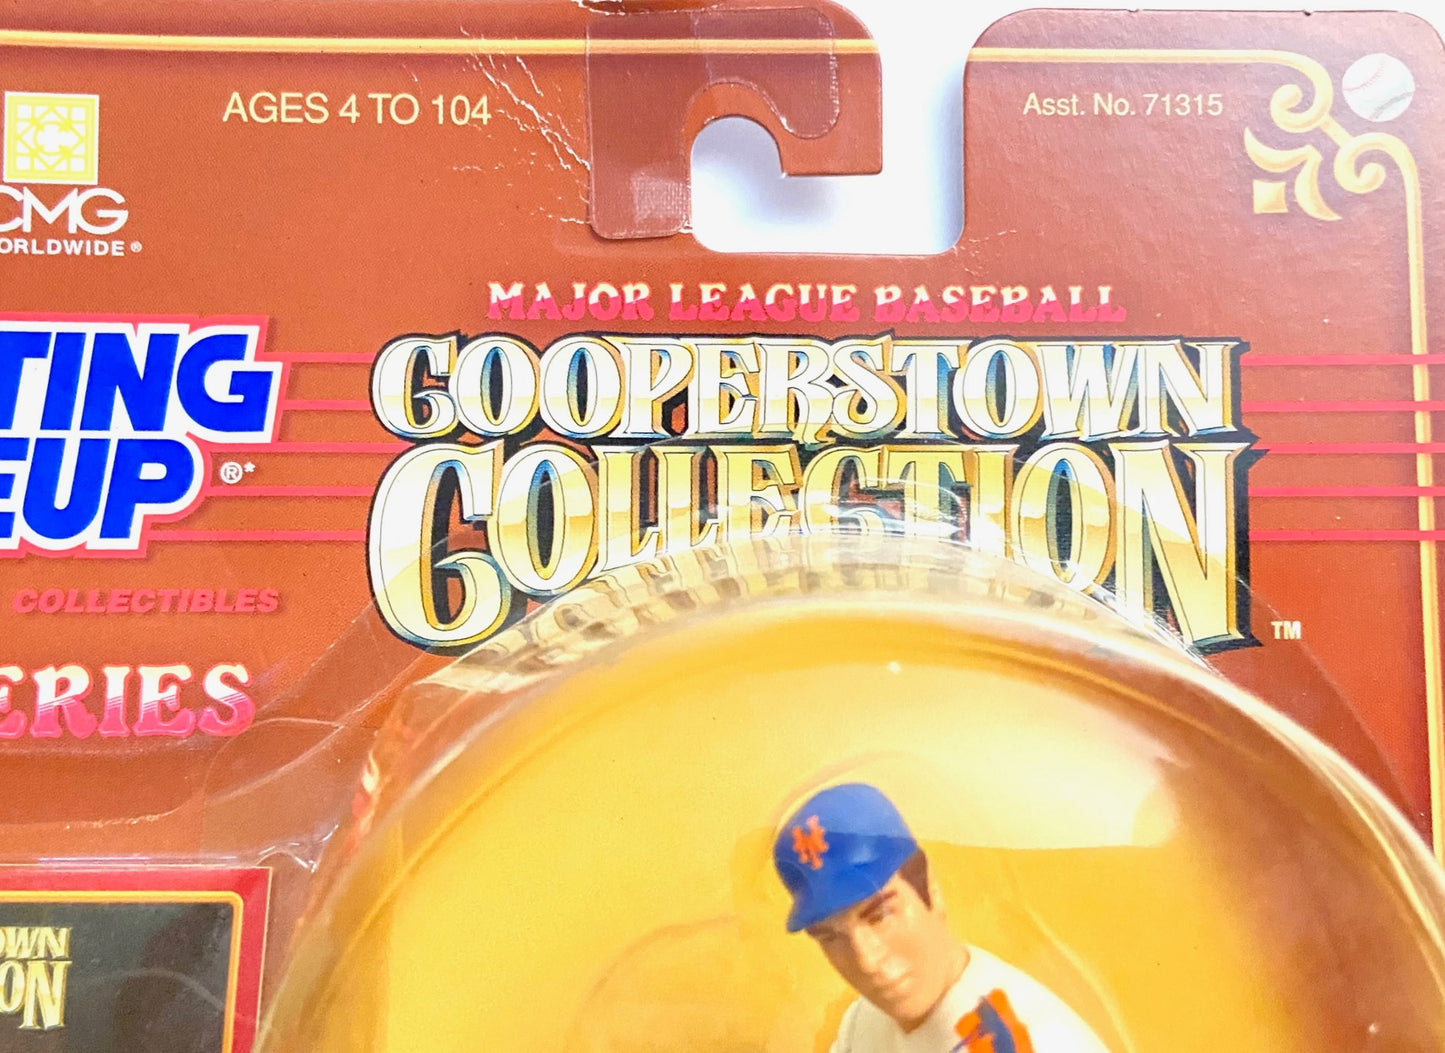 Tom Seaver 1998 Cooperstown Collection Starting Lineup MLB Figurine (New) by Kenner